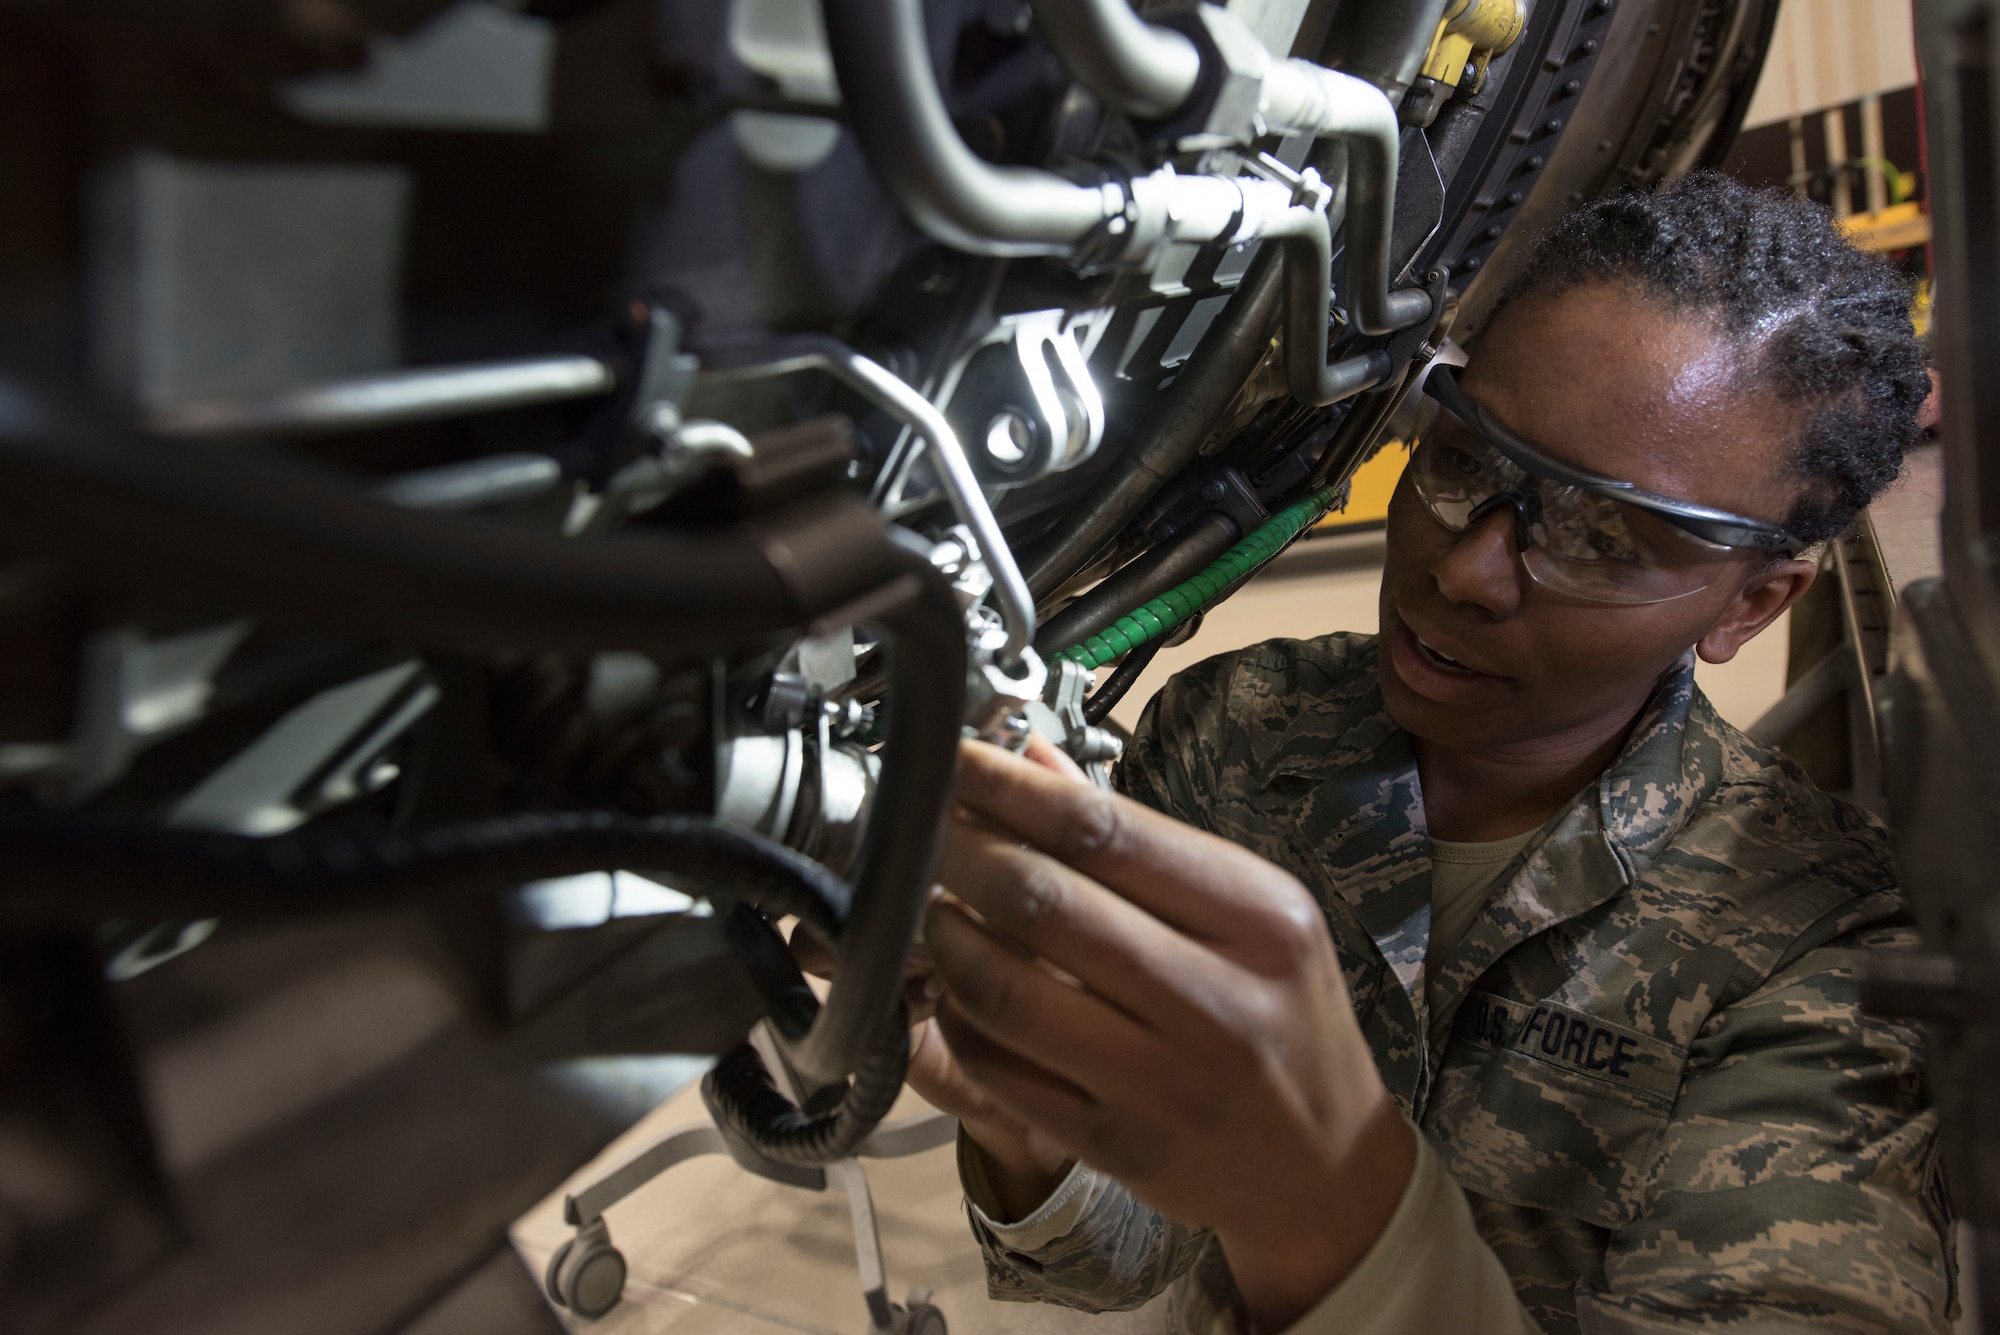 U.S. Air Force Senior Airman Courtney Parker, a 113th Maintenance Squadron aerospace propulsions technician from Joint Base Andrews, Md., repairs an F-16 Fighting Falcon engine at Misawa Air Base, Japan, Feb. 25, 2019. The Misawa central repair facility provides the U.S. Pacific Air Forces with an in-theater option for repairs and overhaul of the GE F110 engines in support of all PACAF F-16 bases. (U.S. Air Force photo by Airman 1st Class Collette Brooks)